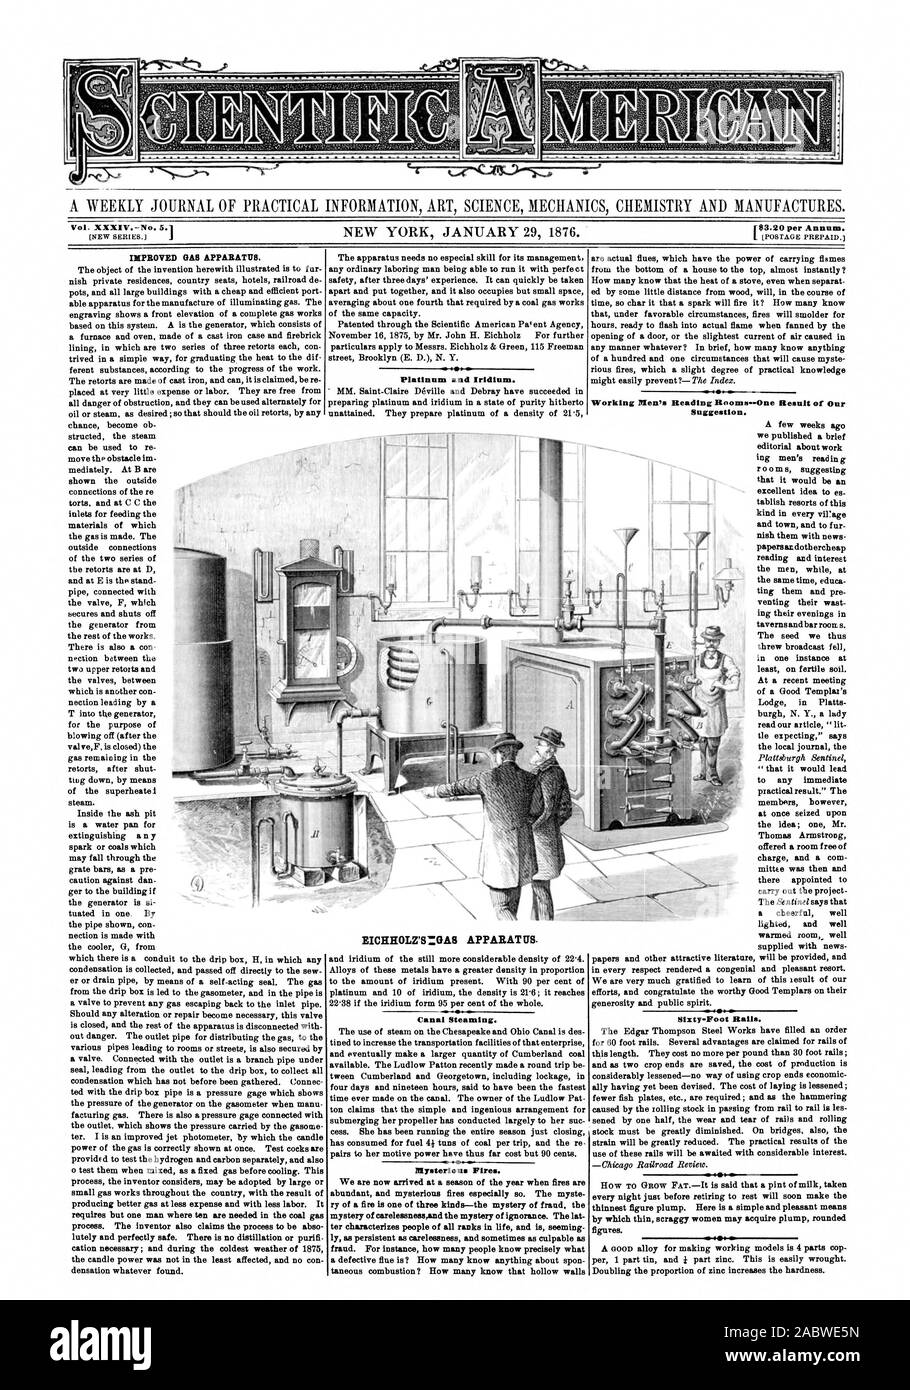 A WEEKLY JOURNAL OF PRACTICAL INFORMATION ART SCIENCE MECHANICS CHEMISTRY AND MANUFACTURES. Vol. XXXIV.-No. 5.1 [$3.20 per Annum. Platinum and Iridium. EICHHOLZ'S=GA8 APPARAT US. Canal Steaming. 'Mysterious Fires. Suggestion., scientific american, 1876-01-29 Stock Photo